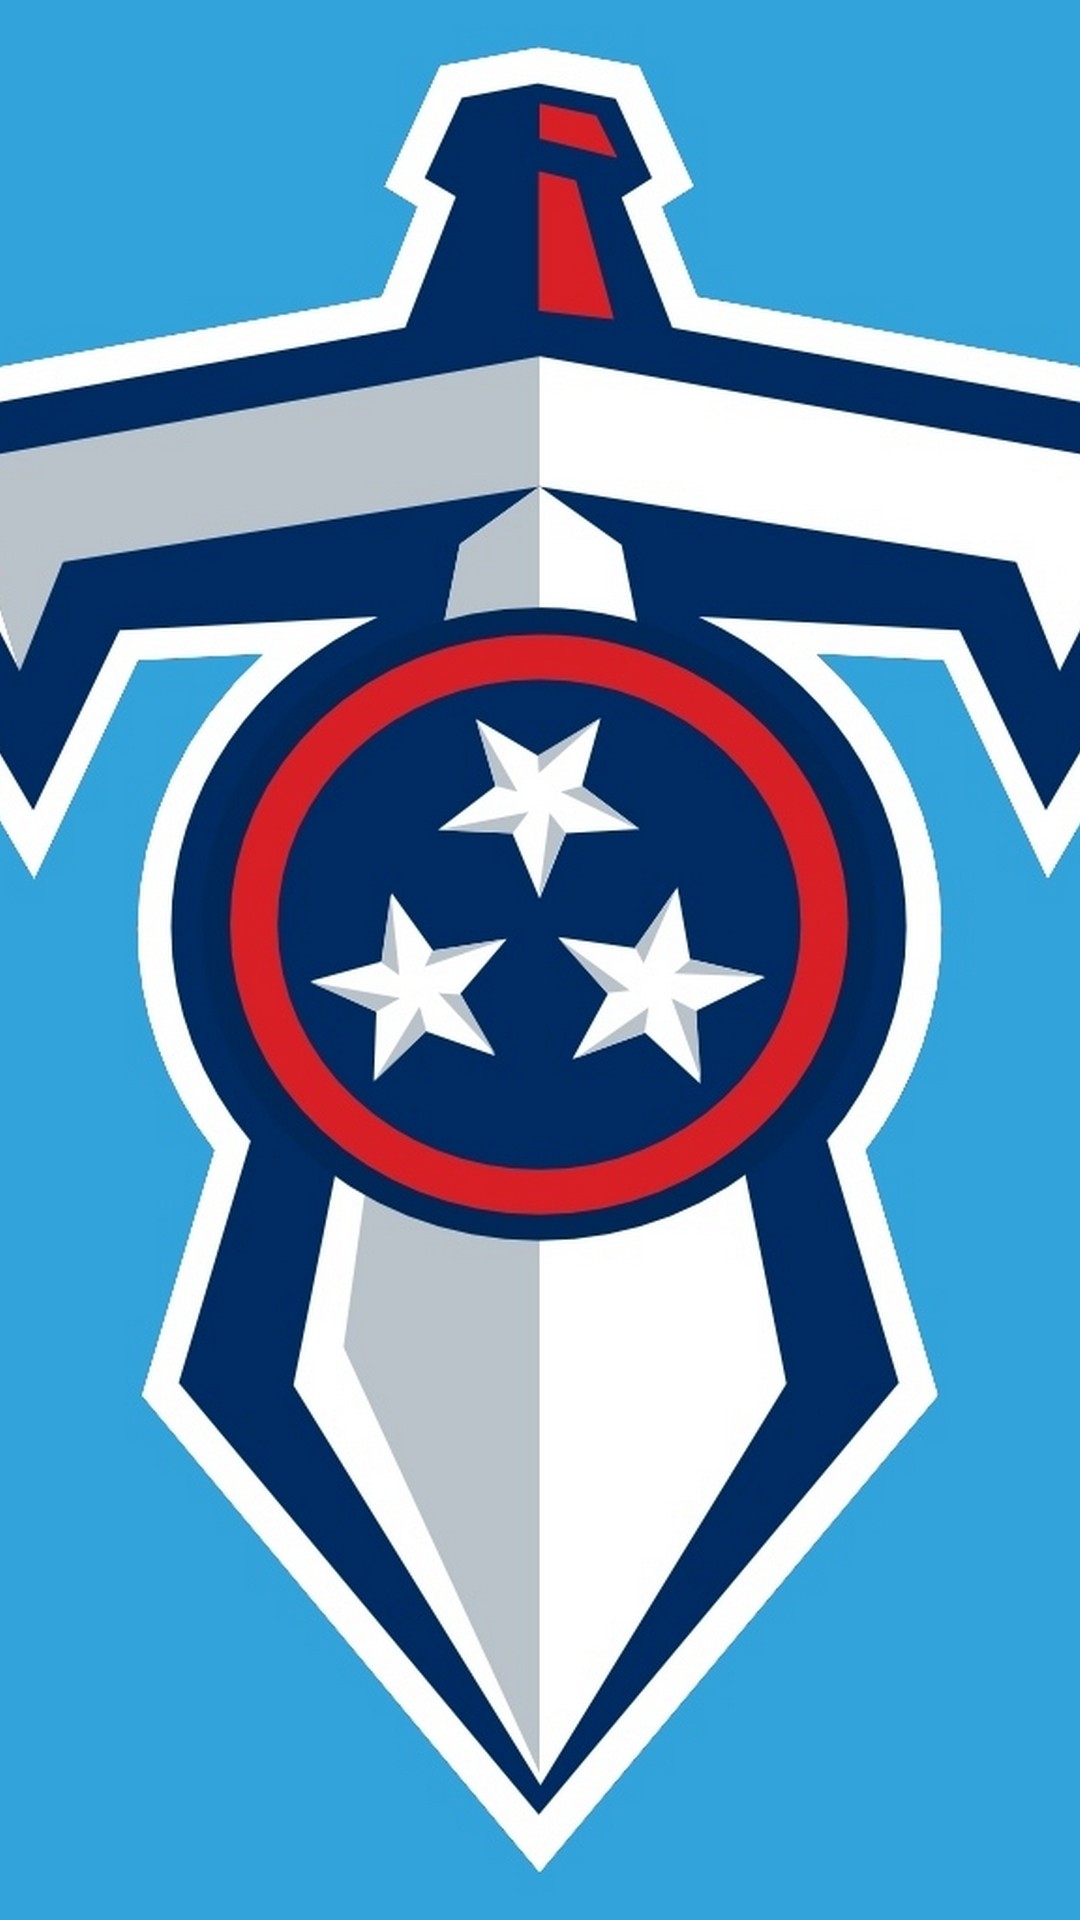 Tennessee Titans Wallpaper Mobile With high-resolution 1080X1920 pixel. You can use this wallpaper for your Mac or Windows Desktop Background, iPhone, Android or Tablet and another Smartphone device